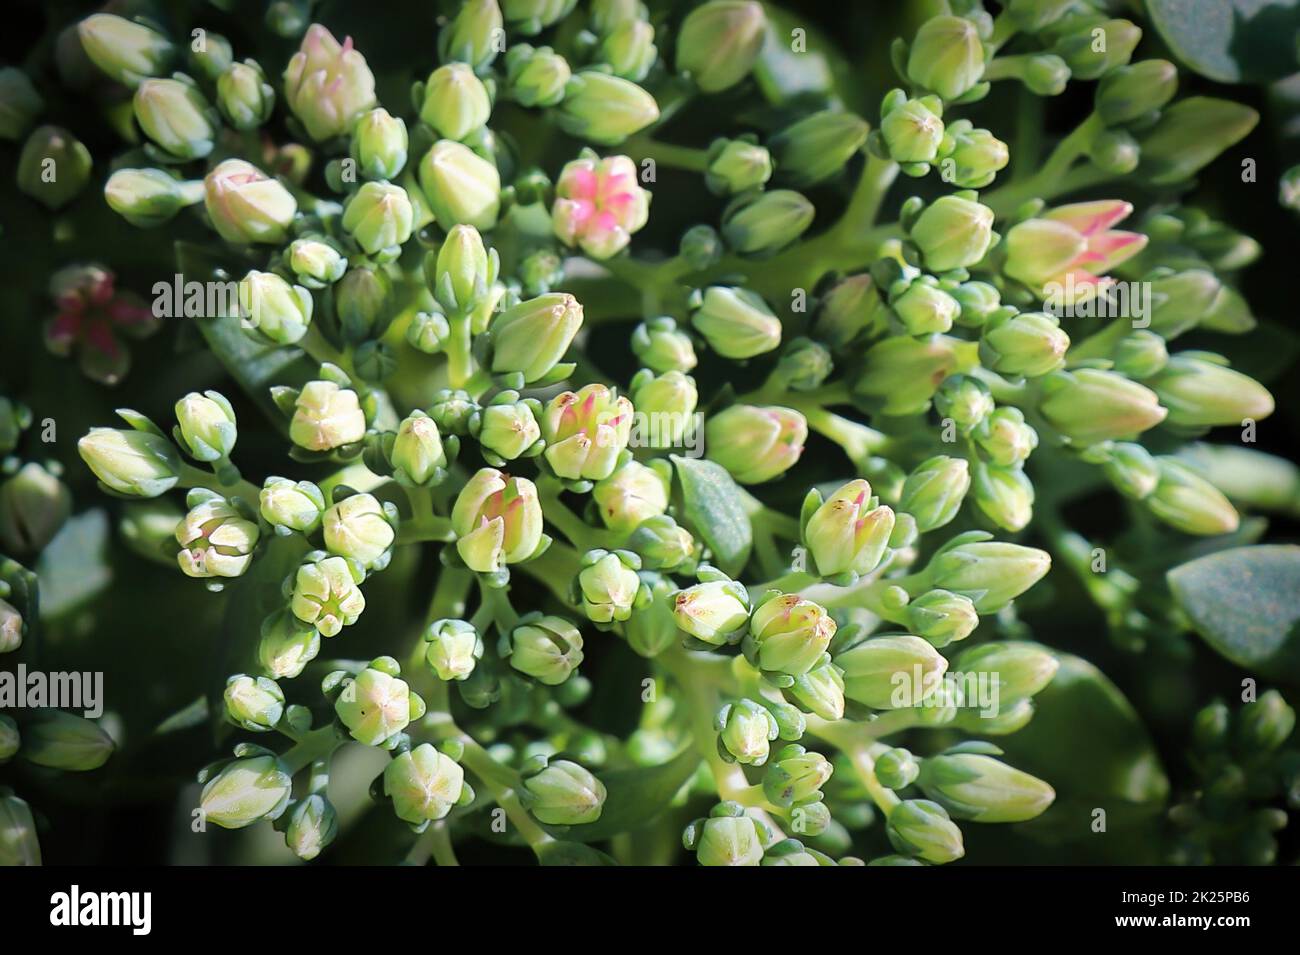 Green flower buds on a Stonecrop plant Stock Photo